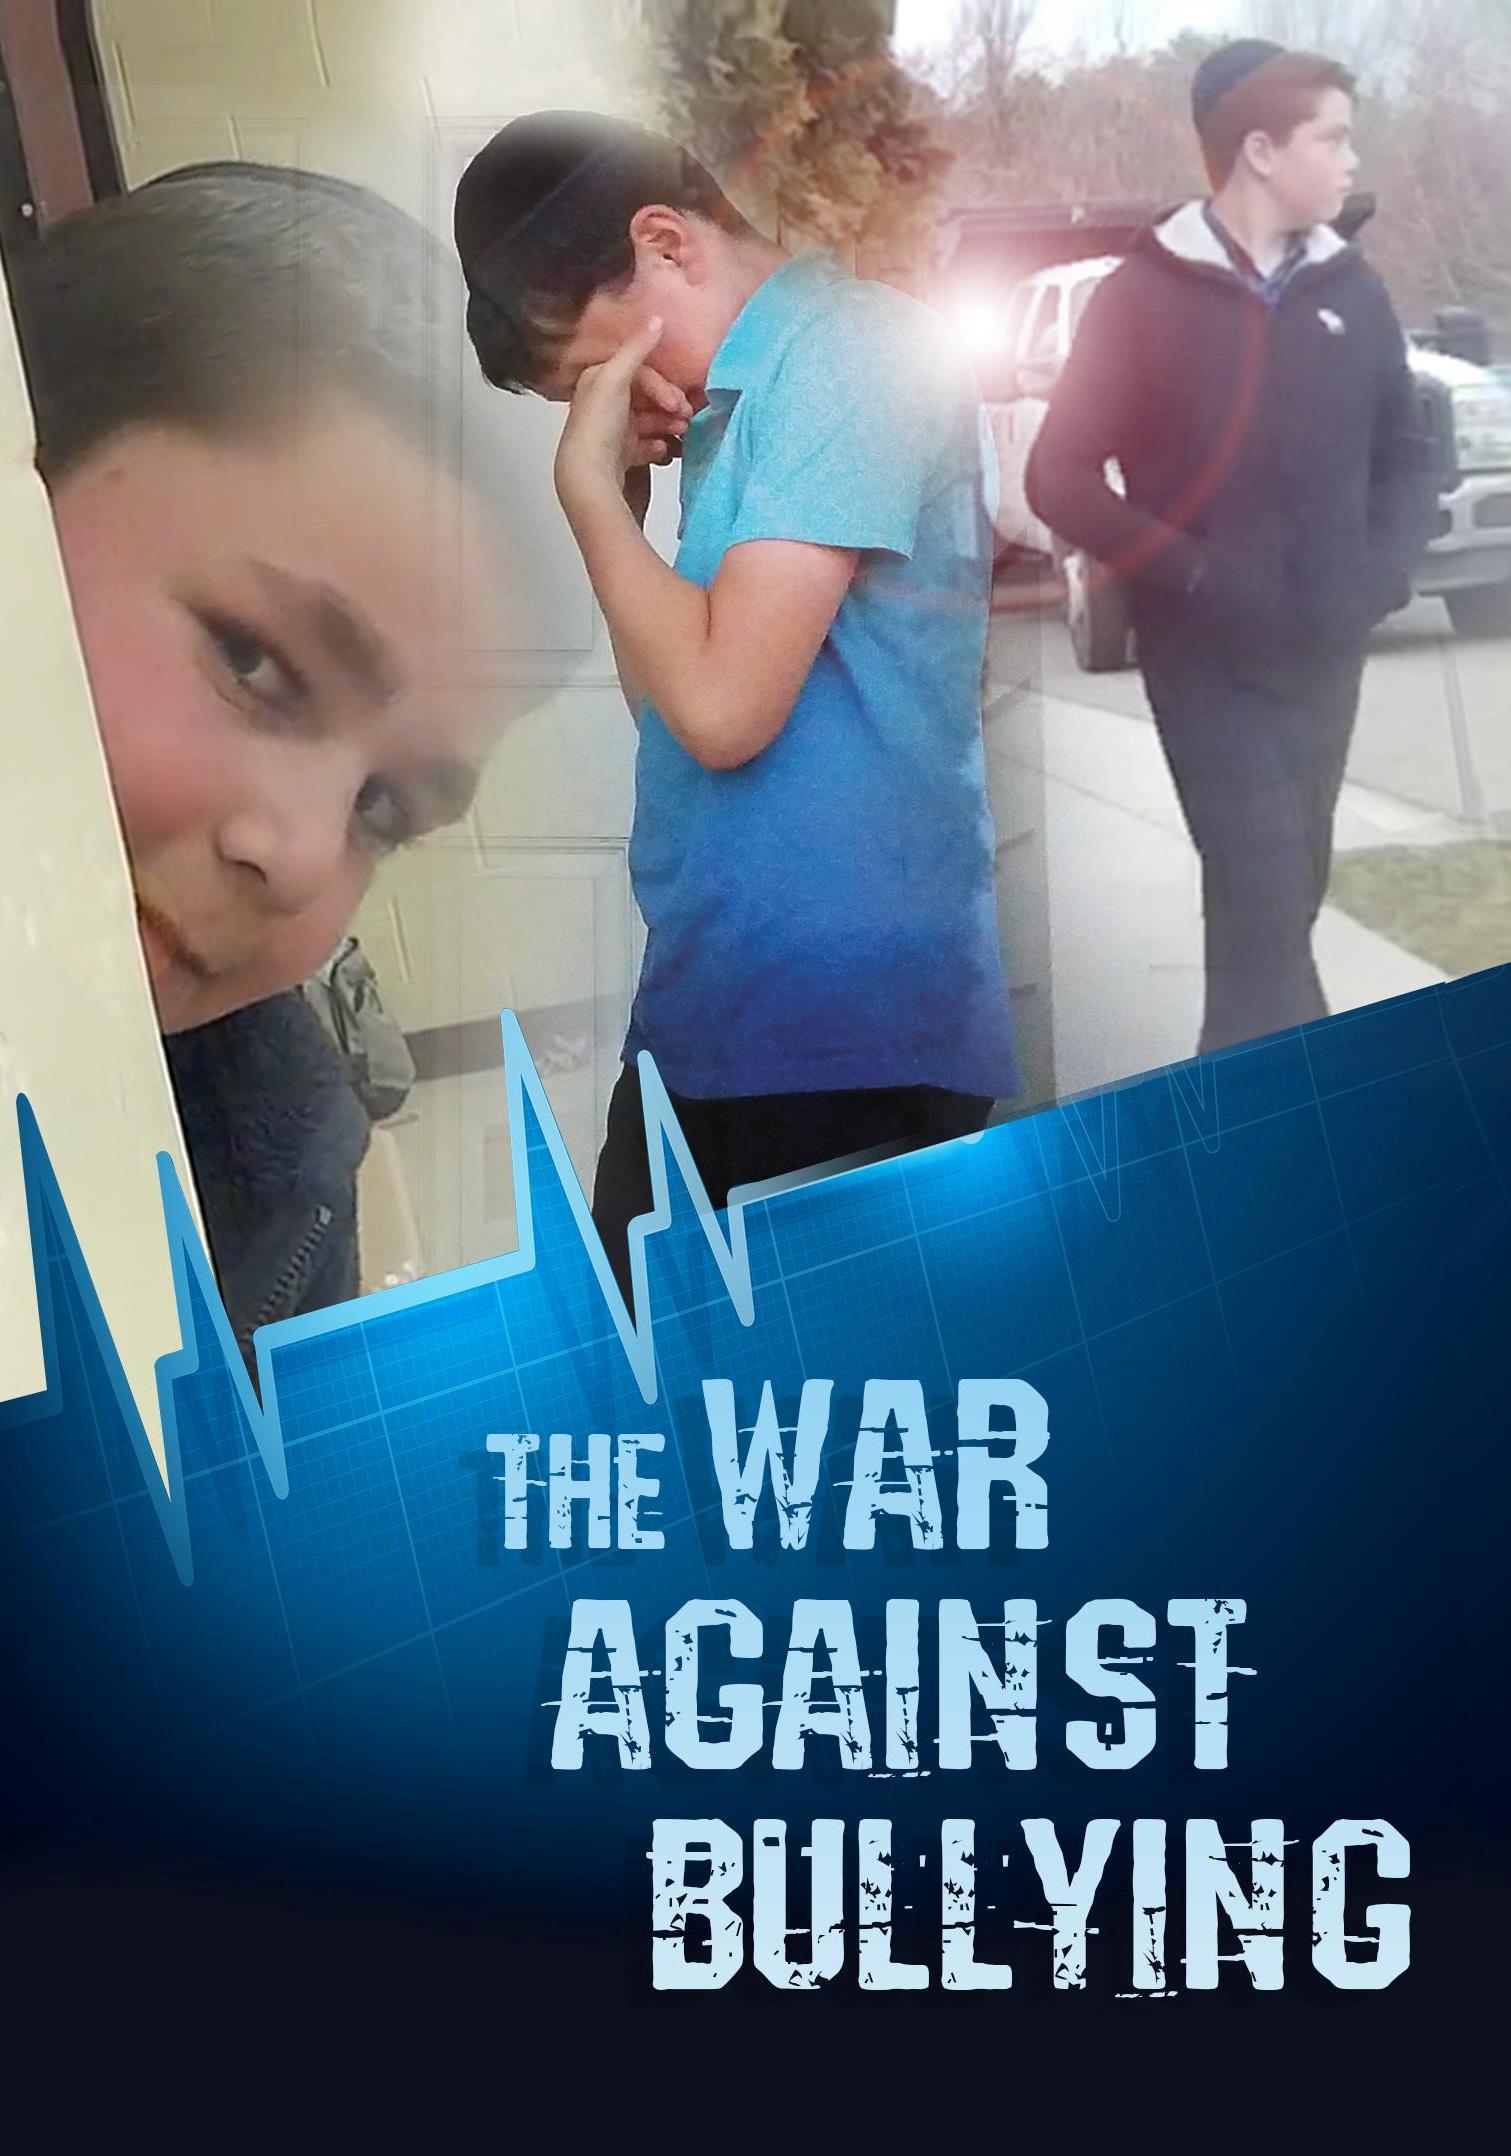 The War Against Bullying (Video)